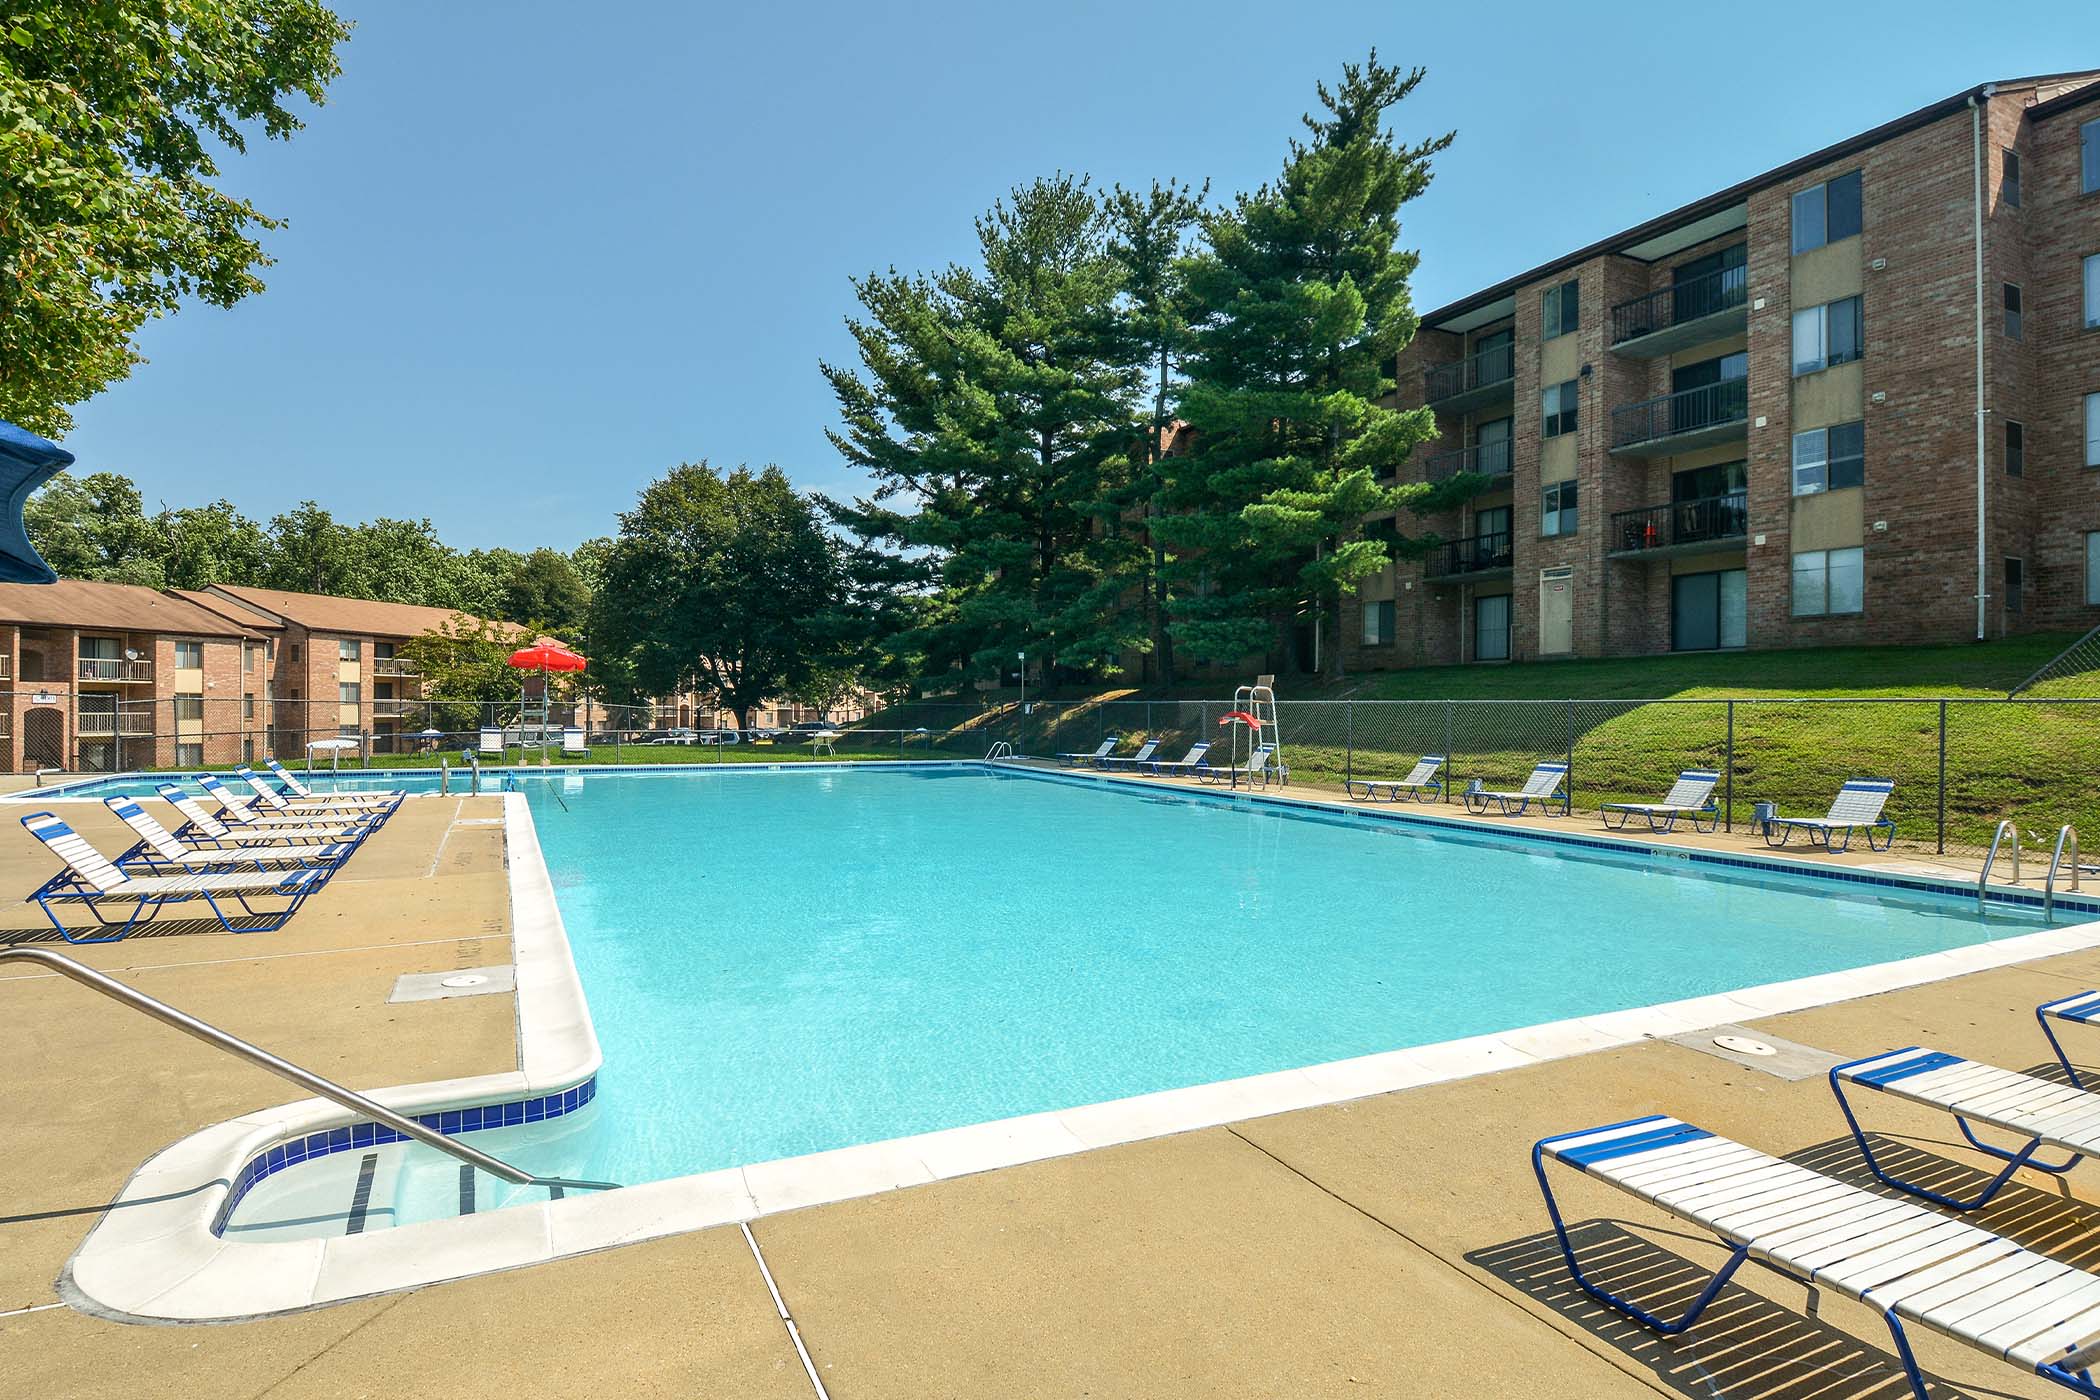 Outdoor swimming pool at The Flats at Columbia Pike, Silver Spring, Maryland